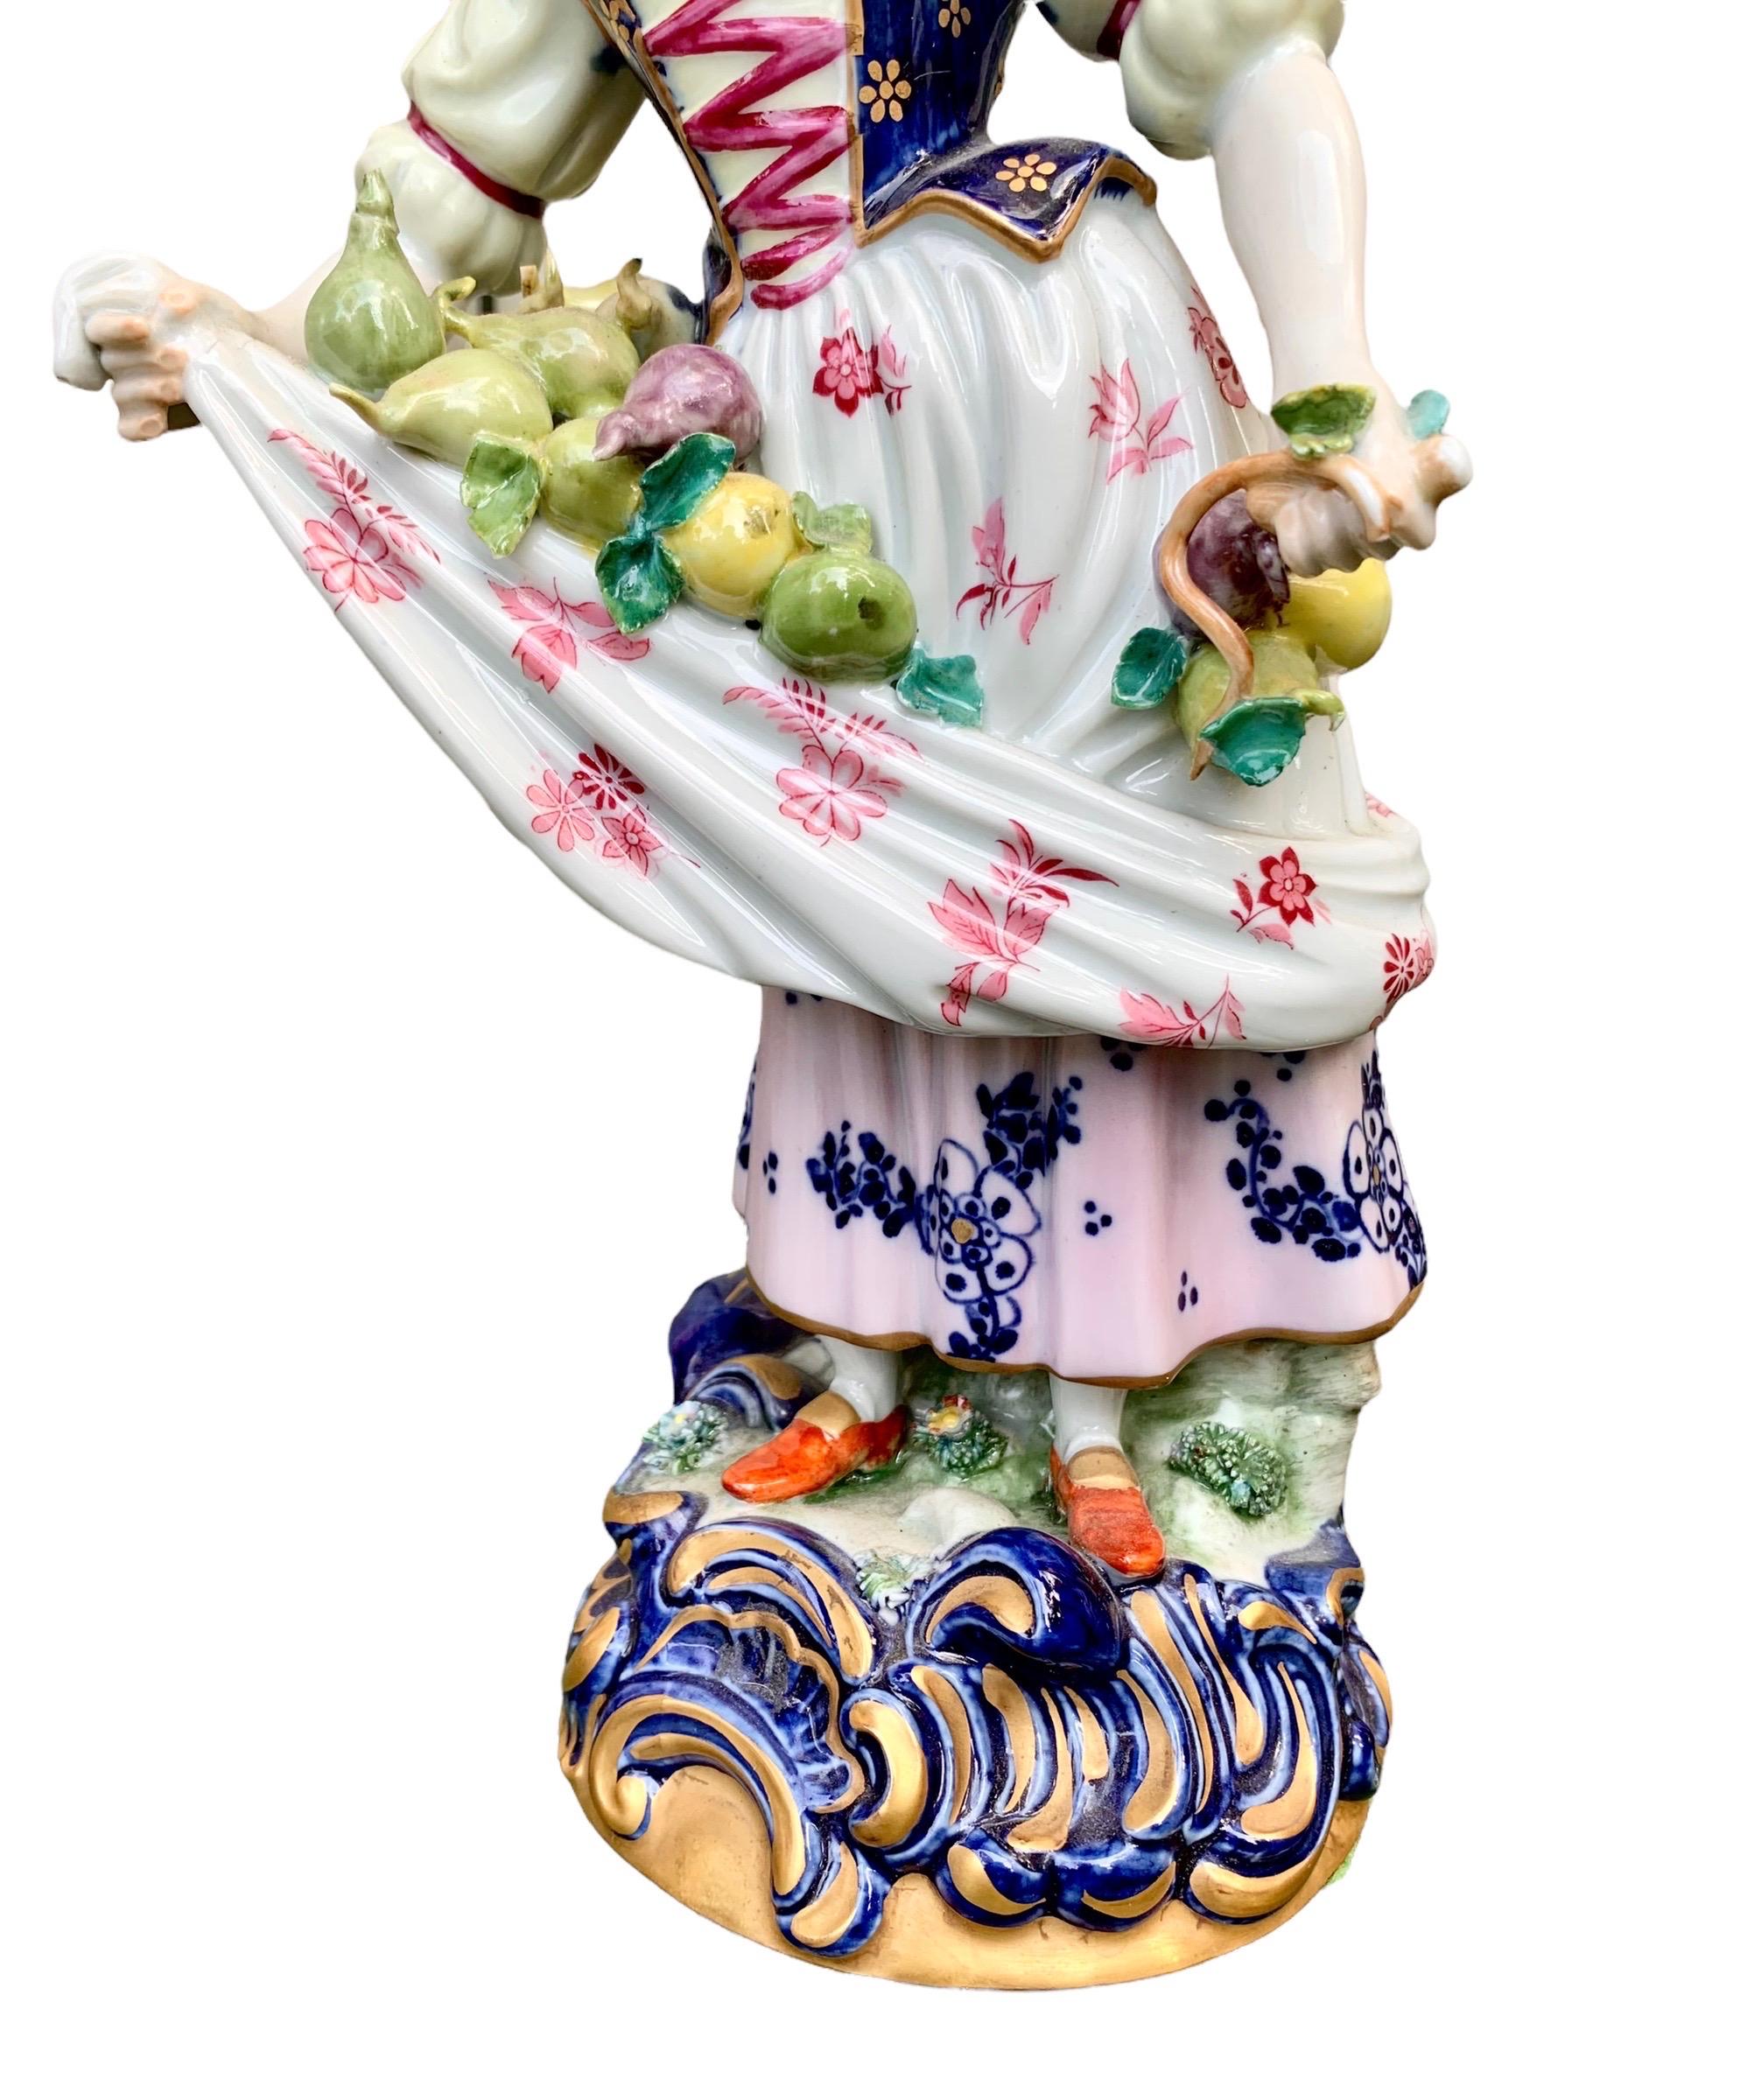 Pair of Early 19th C. Sevres Porcelain Figures For Sale 9